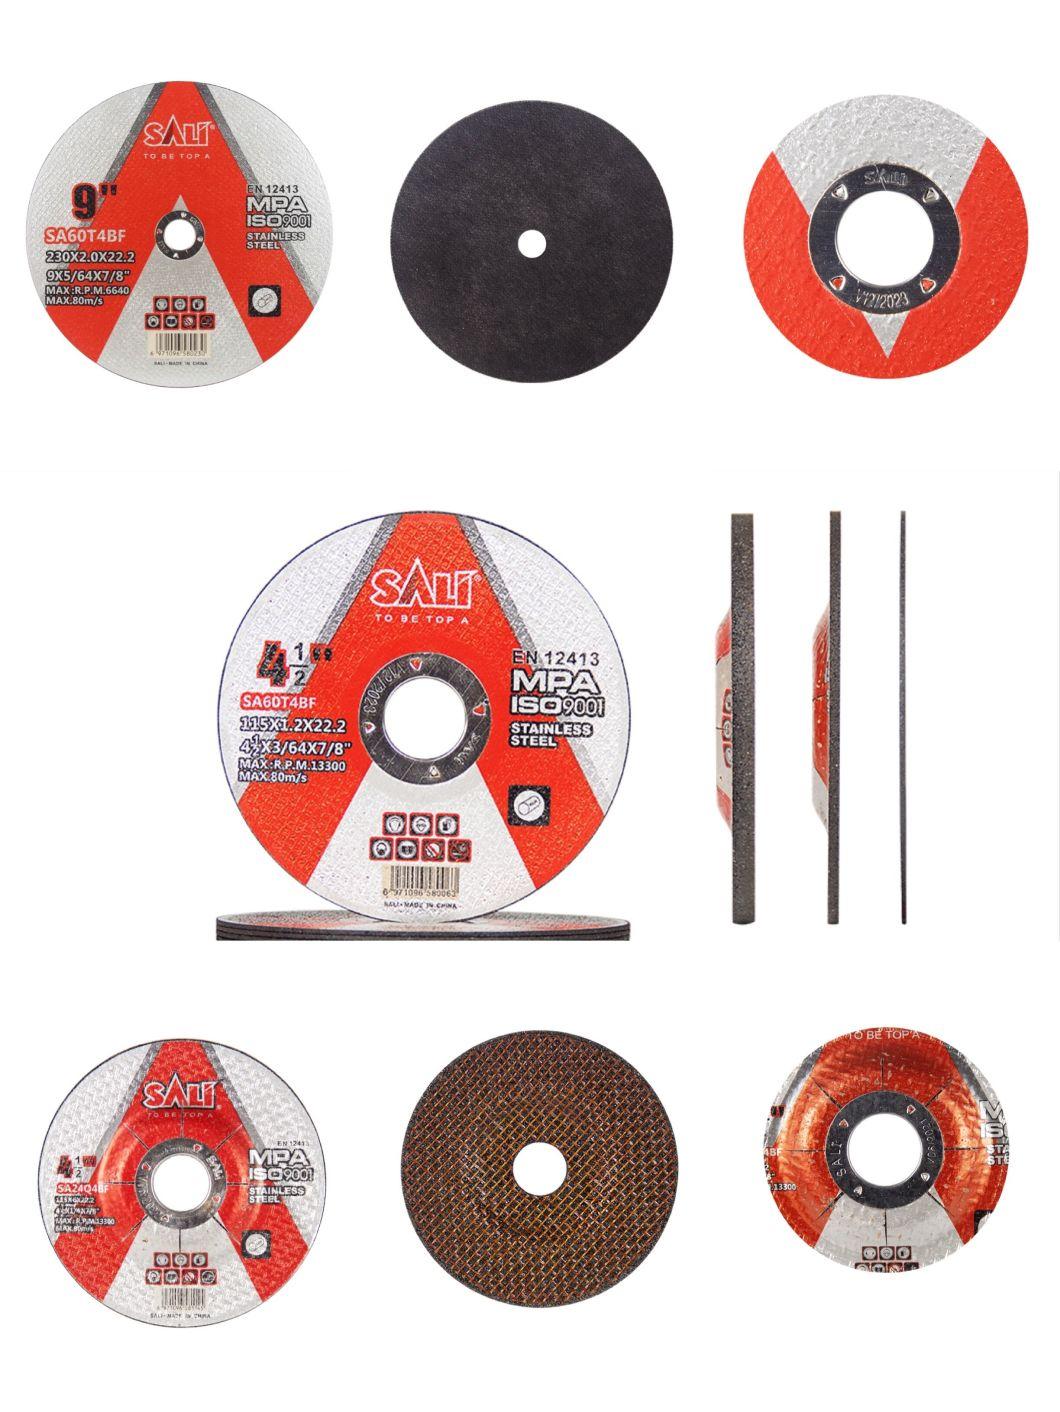 Sali 4inch 107*1.0*16mm Professonal Quality Stainless Steel Cutting Disc